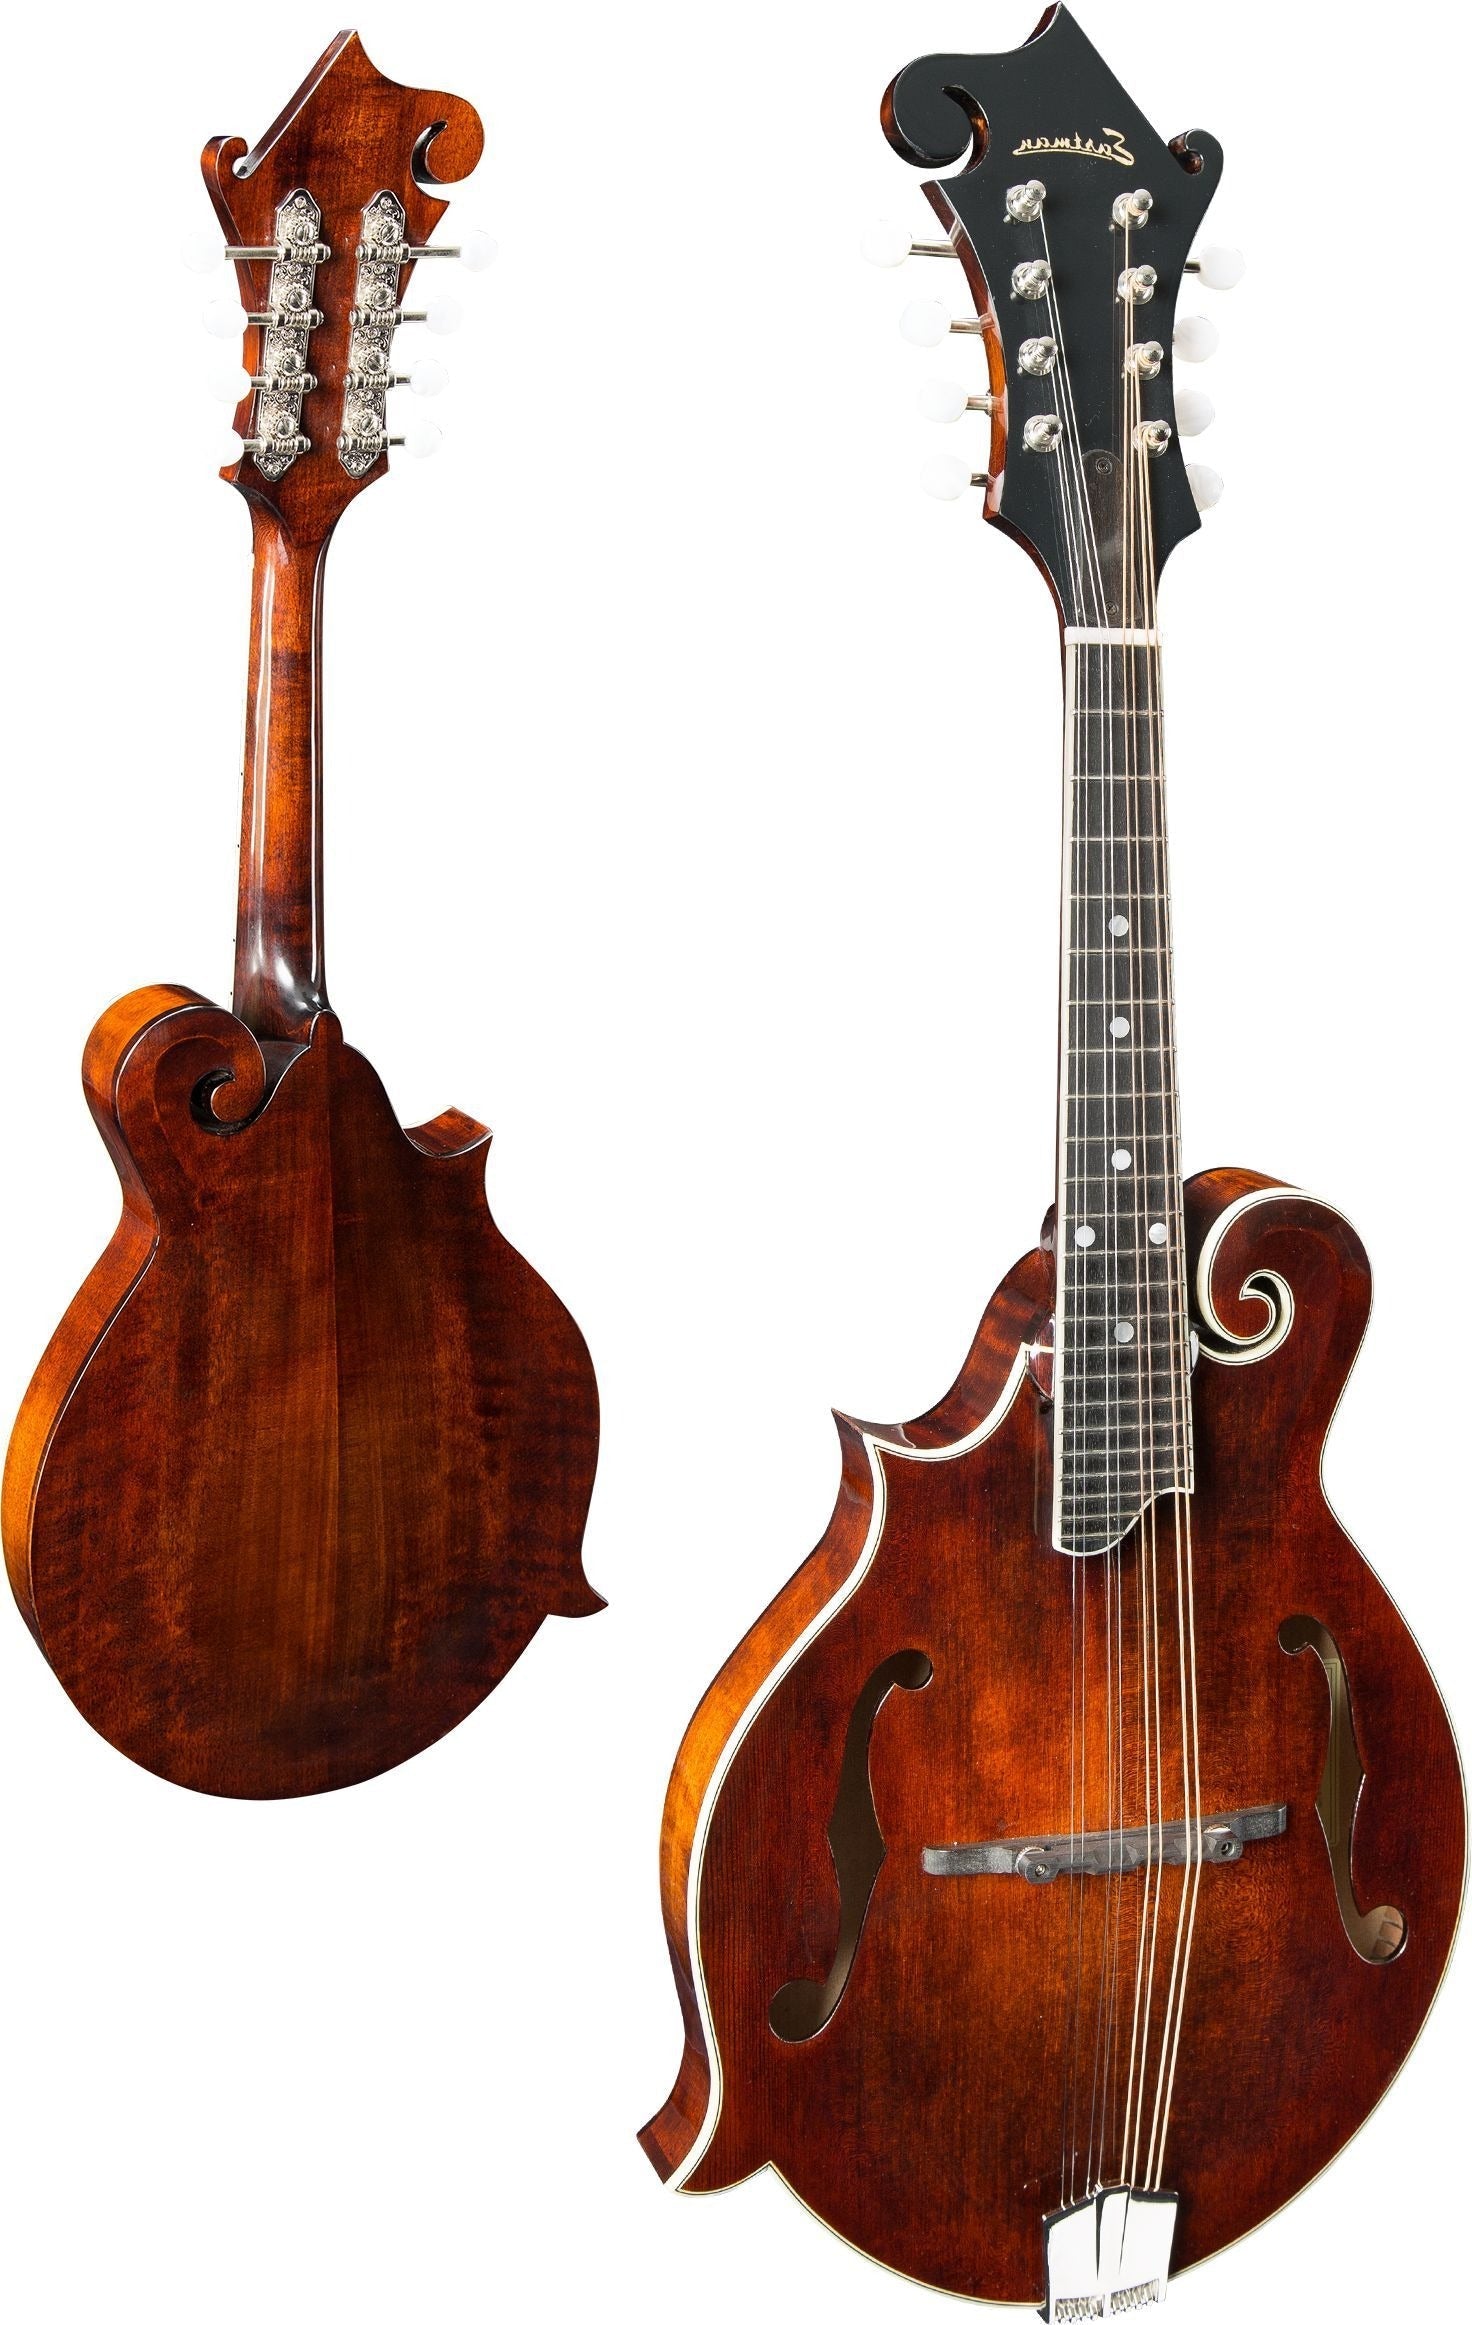 Eastman MD515L F-style F-holes Mandolin, Left handed (Solid Spruce top, Solid Maple back and sides, w/Case), Mandolin for sale at Richards Guitars.